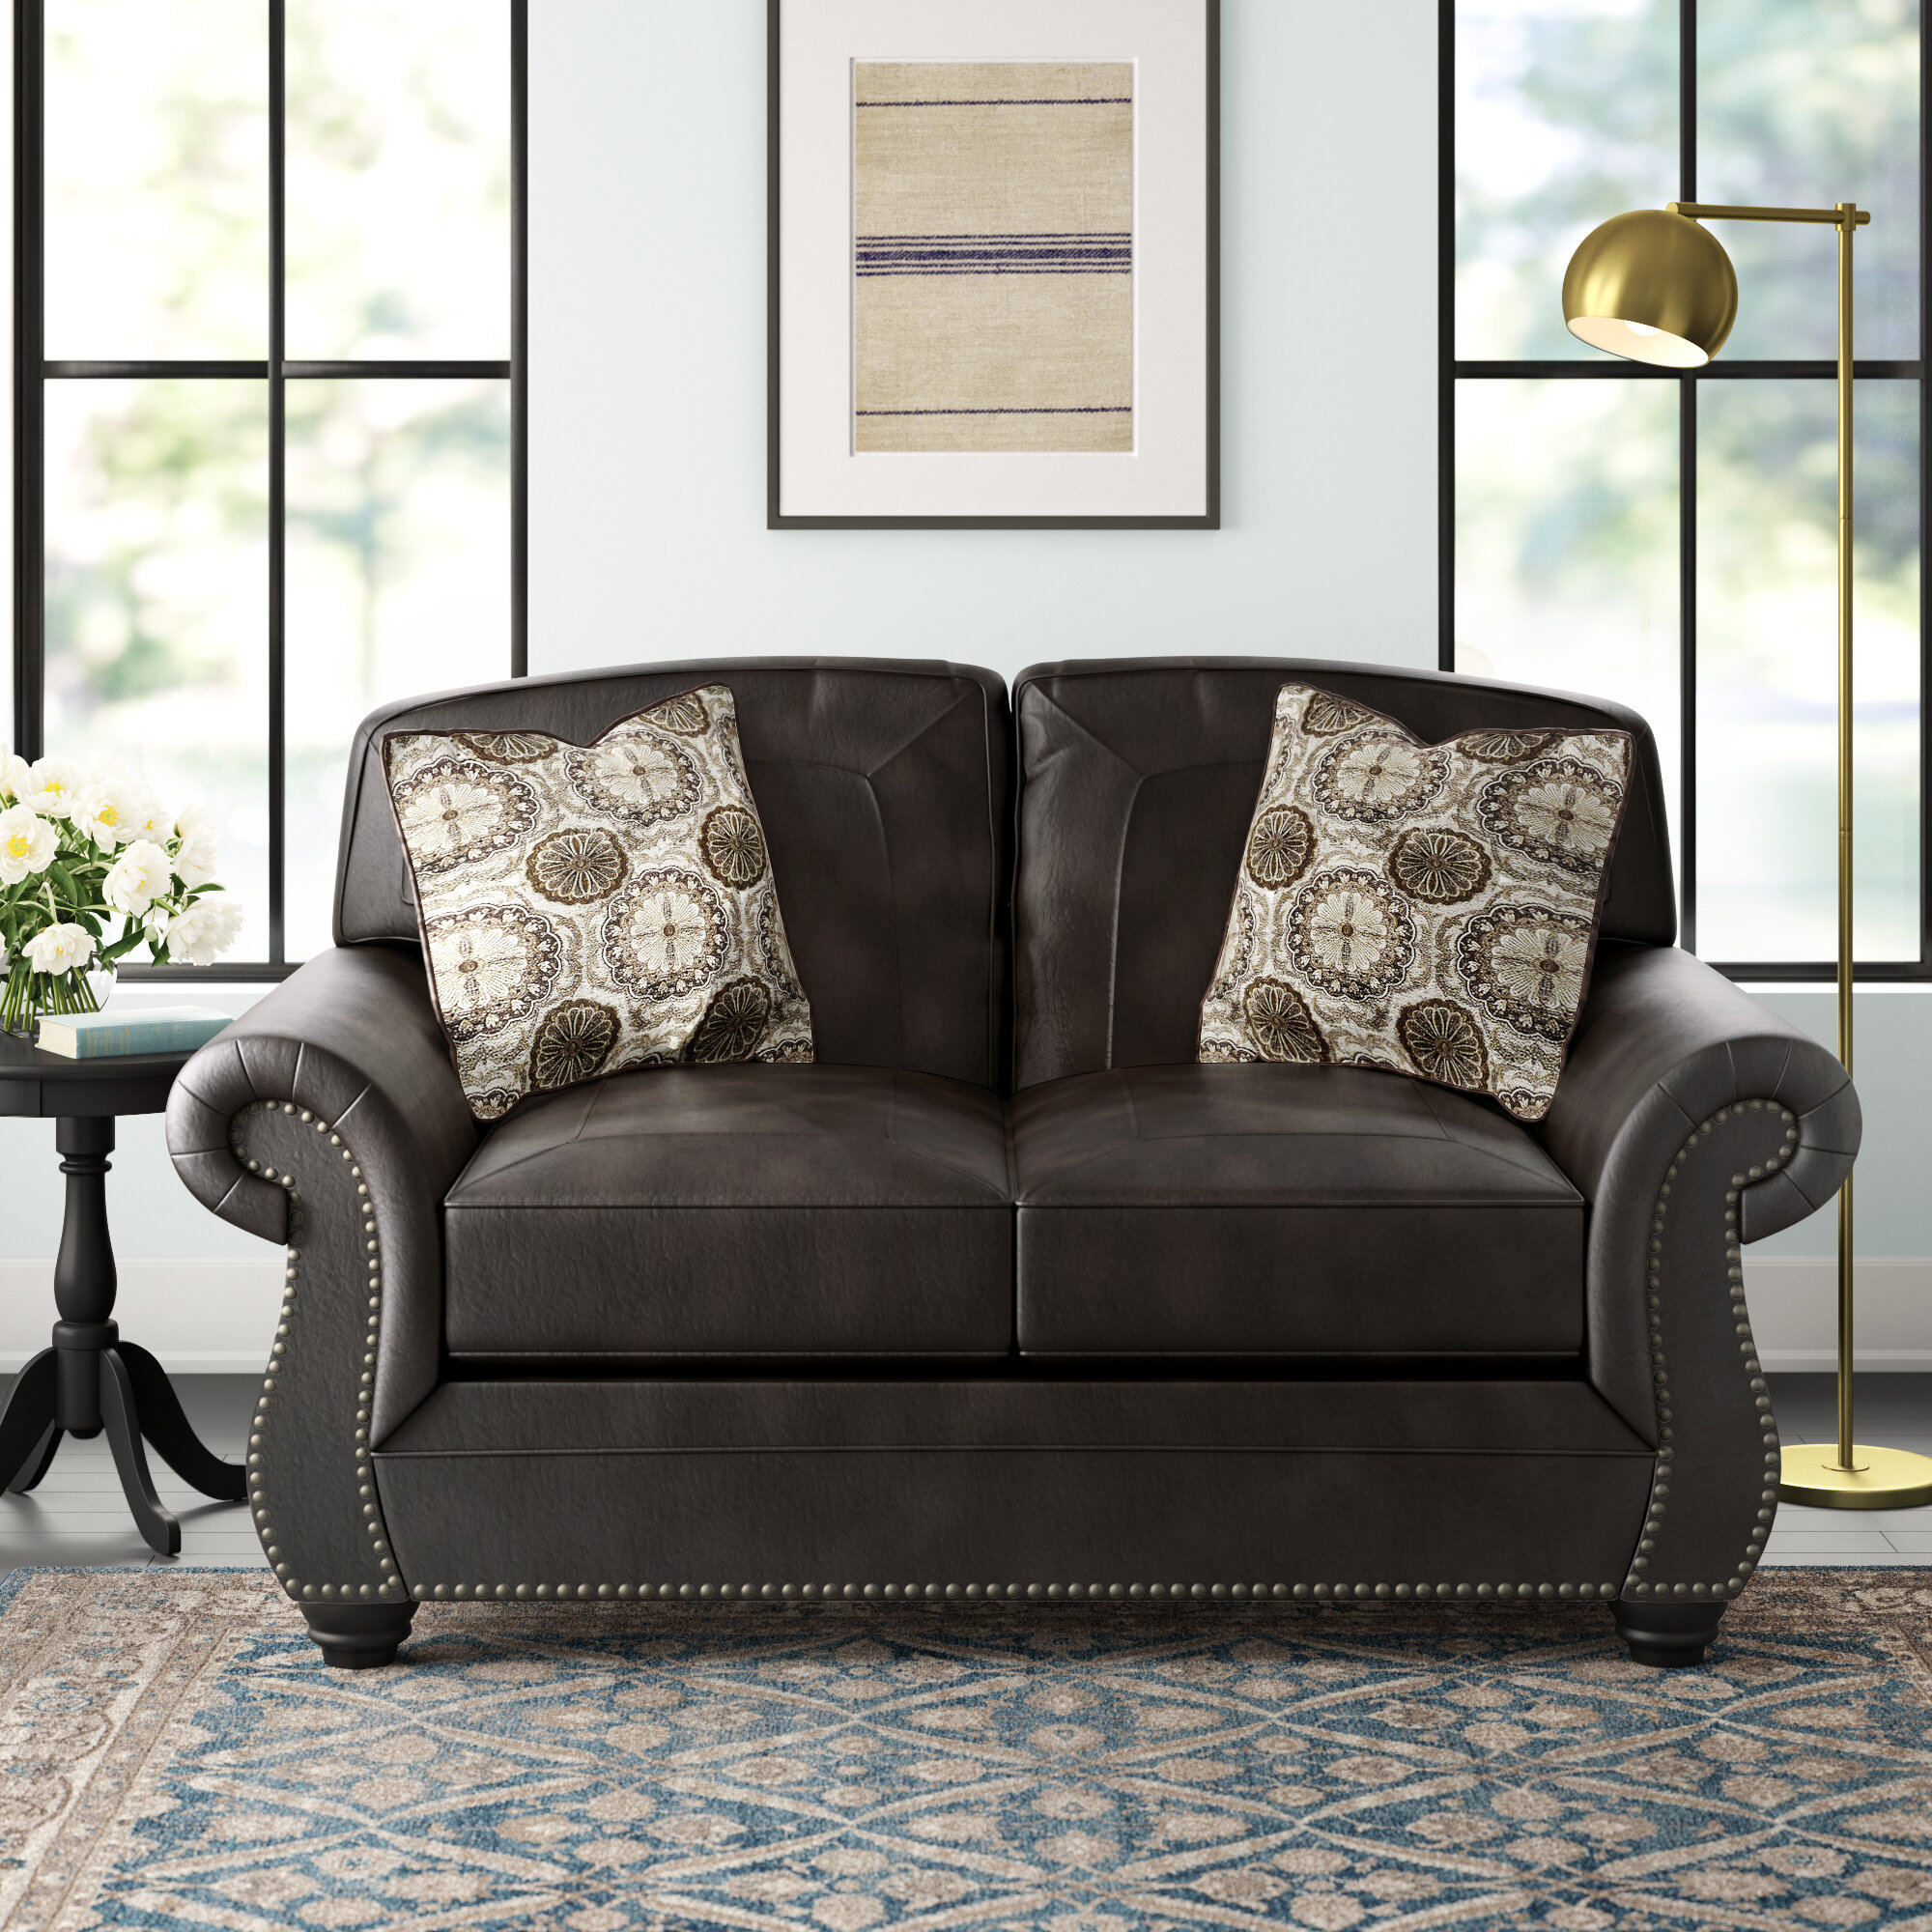 Mooreland 67” Faux Leather Rolled Arm Loveseat with Reversible Cushions